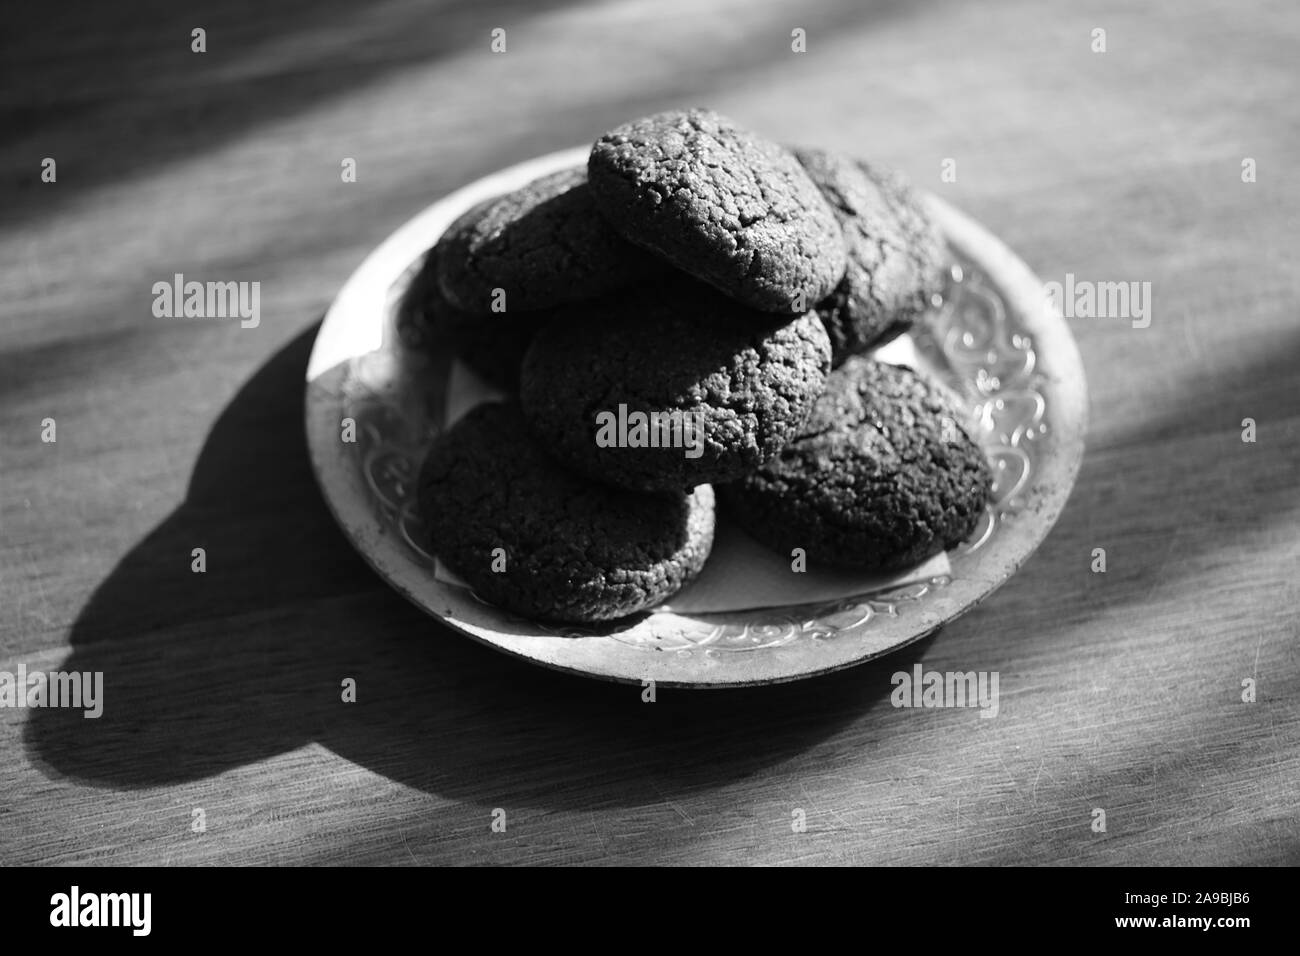 Oatmeal cookies in a silver plate on a wooden table, bw photo. Stock Photo